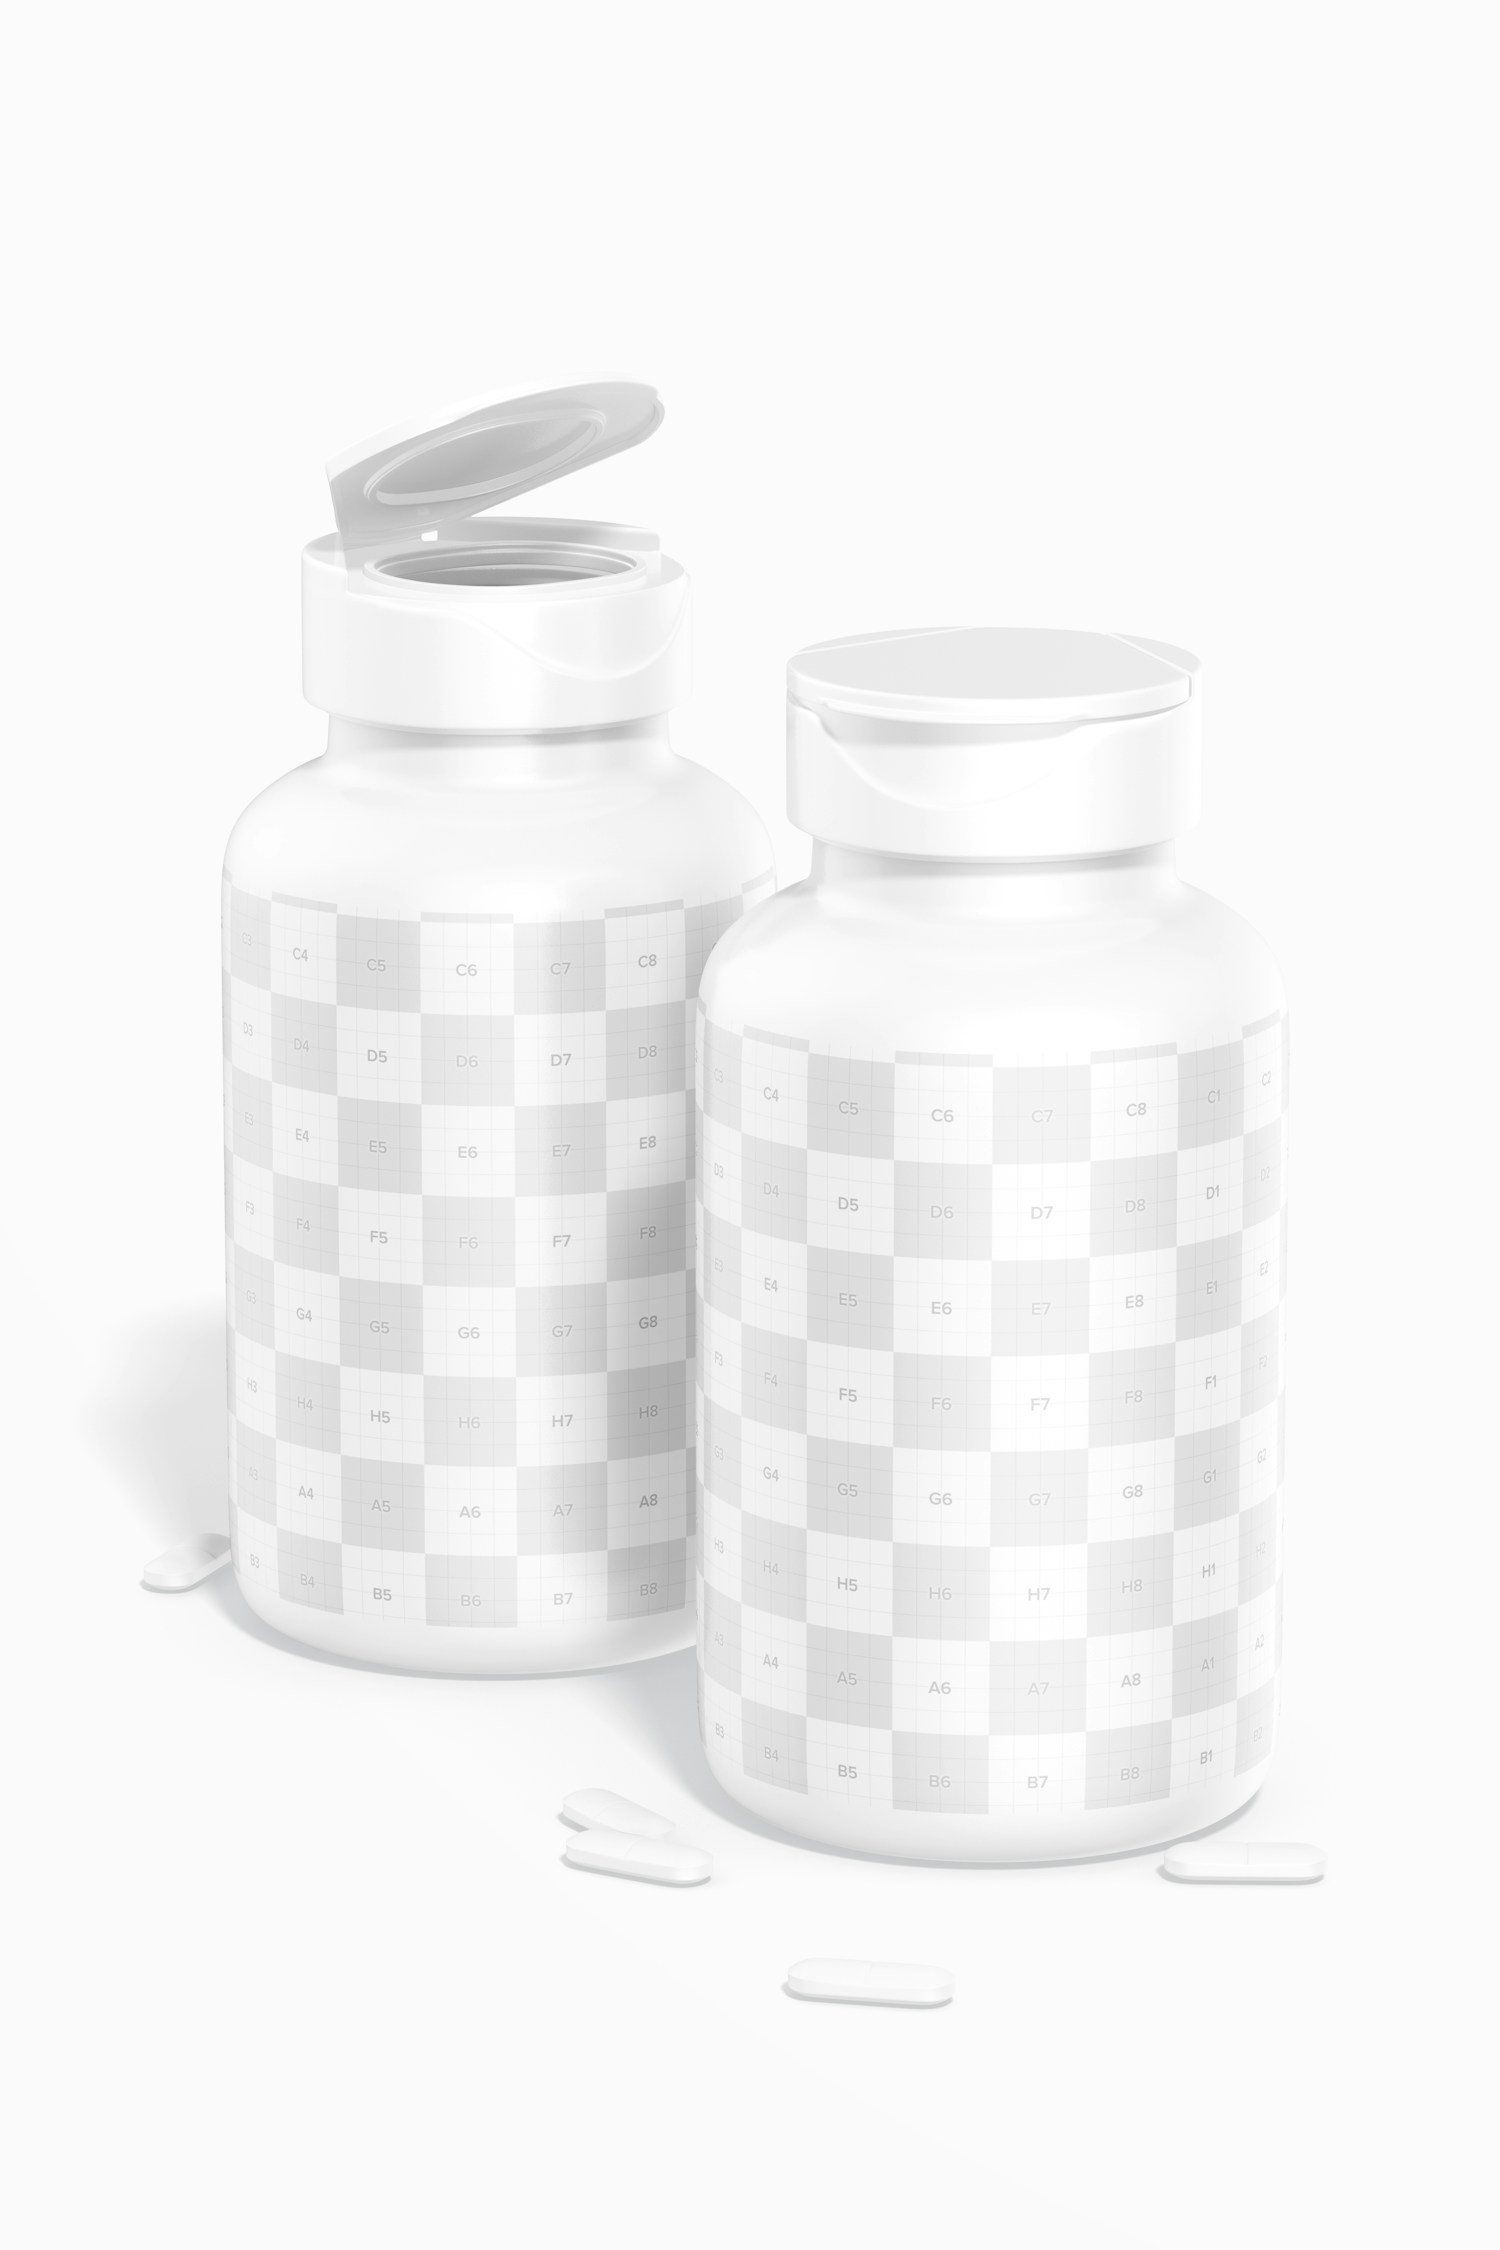 Big Pills Bottle Mockup, Opened and Closed